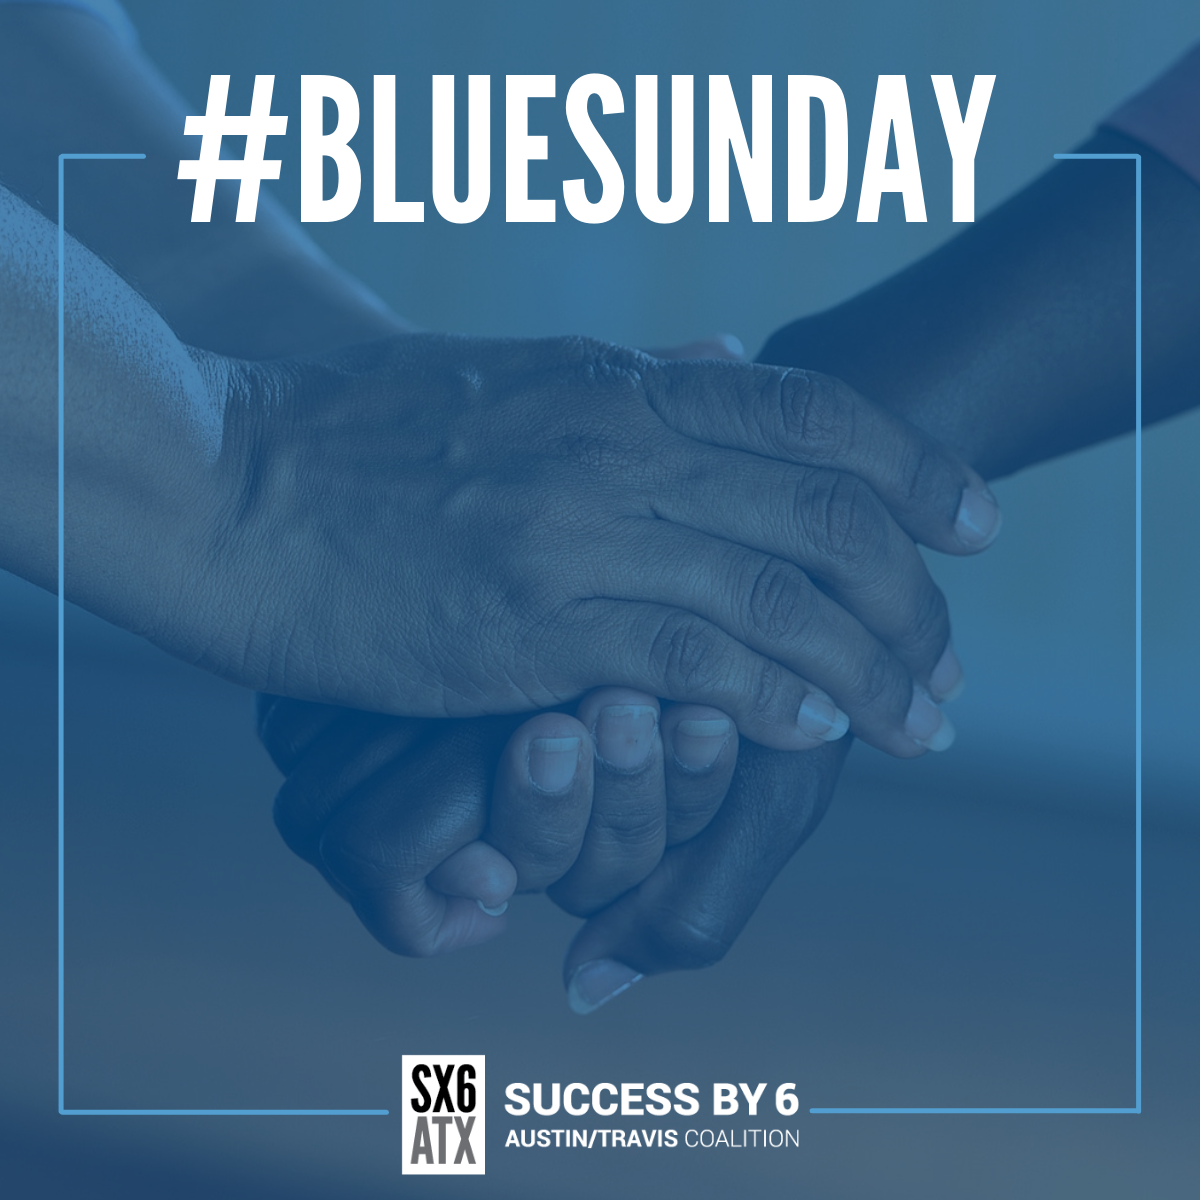 Join us for Blue Sunday